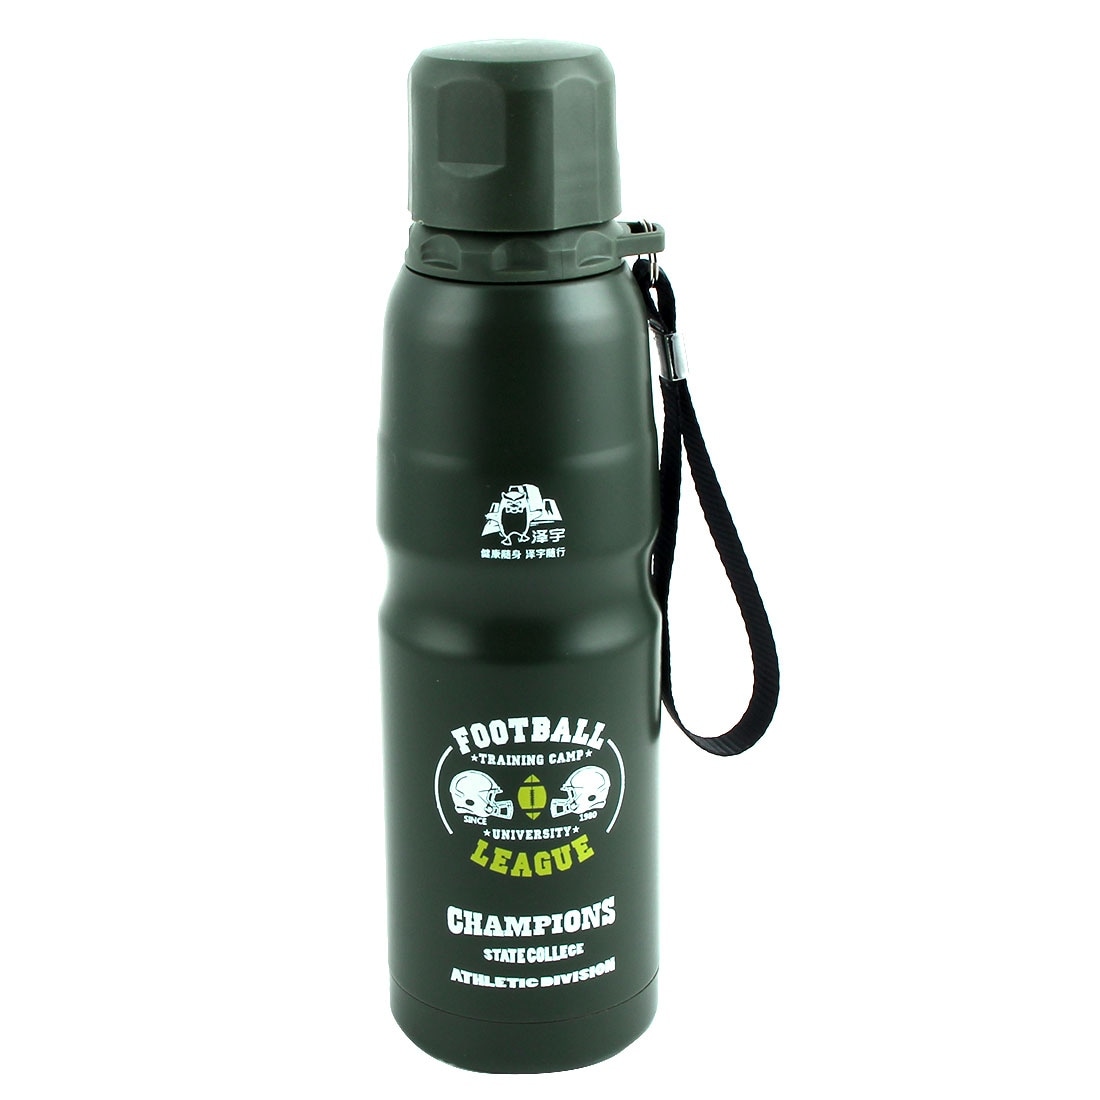 https://ak1.ostkcdn.com/images/products/is/images/direct/f9adc1cbf4f5a2edbf477cc8b1a3357322eca7be/Outdoor-Stainless-Steel-Screw-Cap-Juice-Tea-Water-Bottle-Holder-Army-Green-500ml.jpg